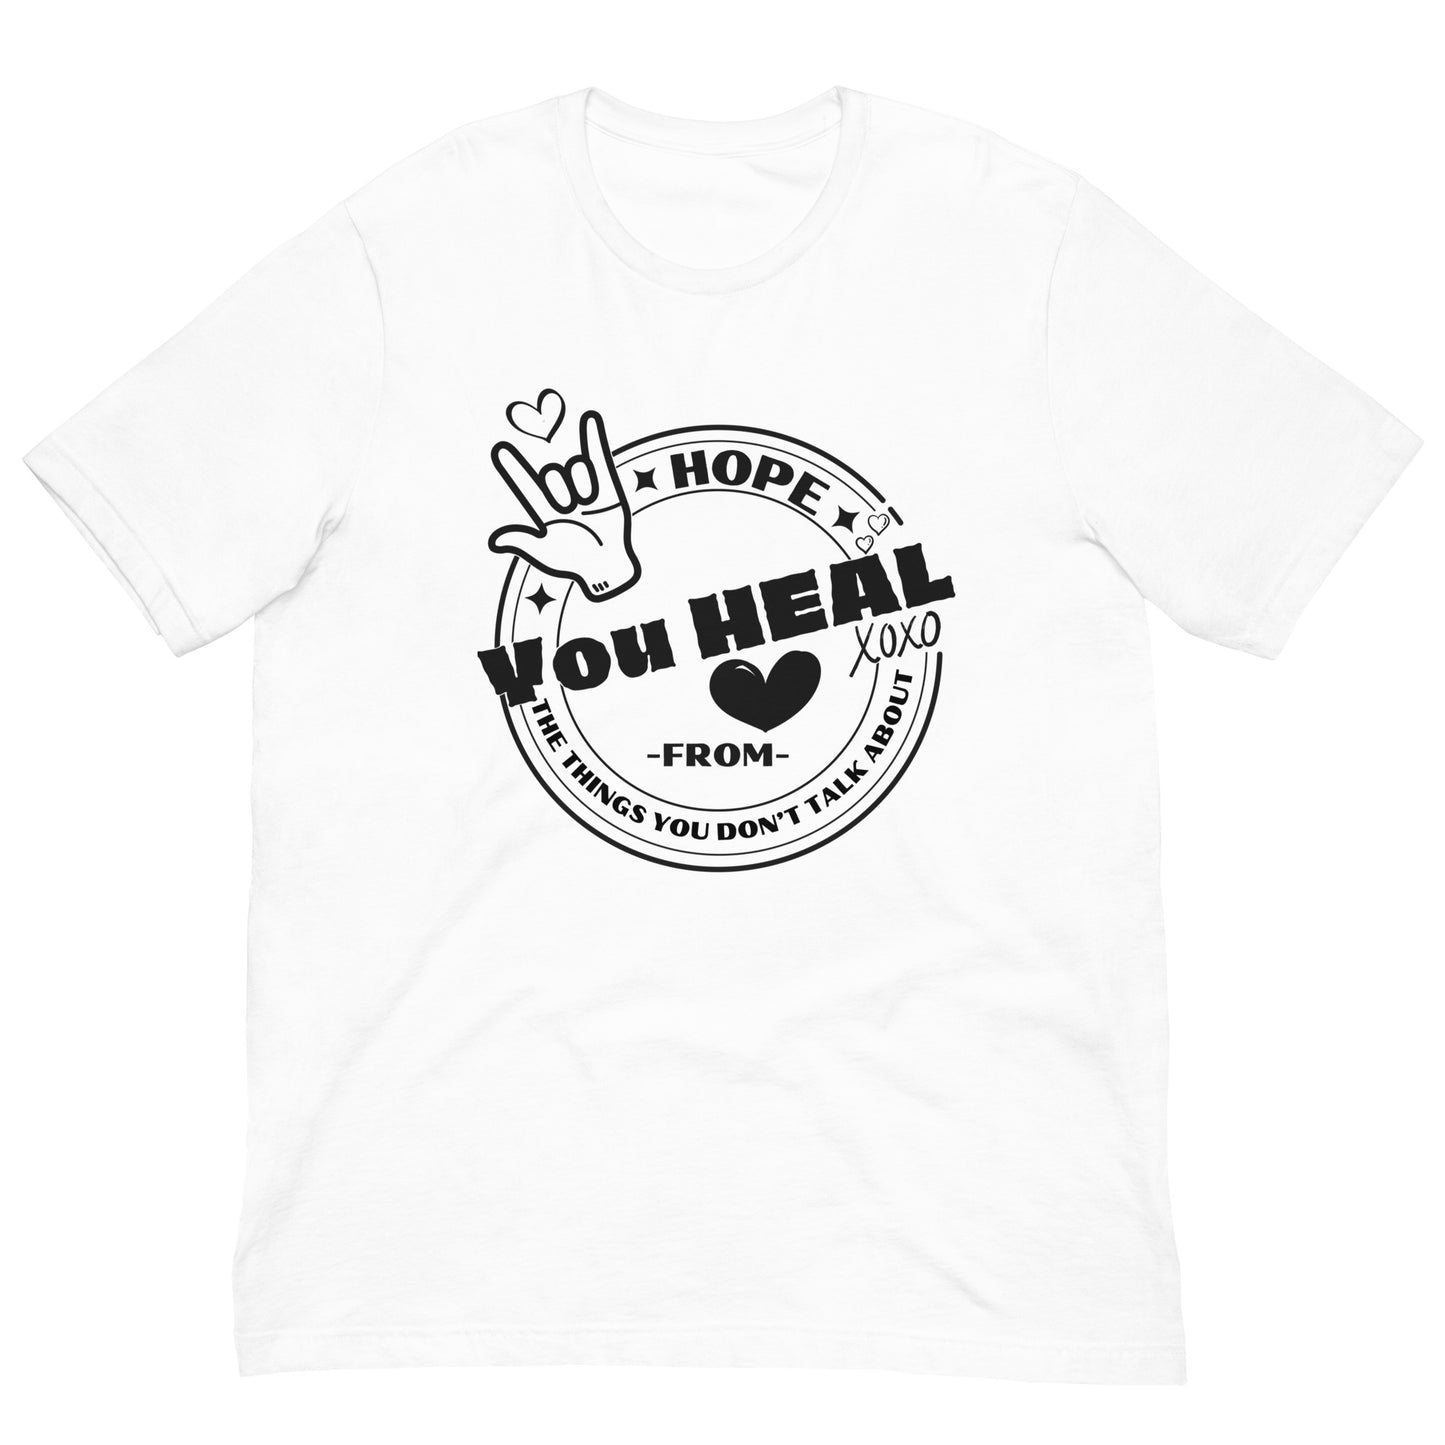 Hope You HEAL from the Things You Don’t Talk About Unisex t-shirt